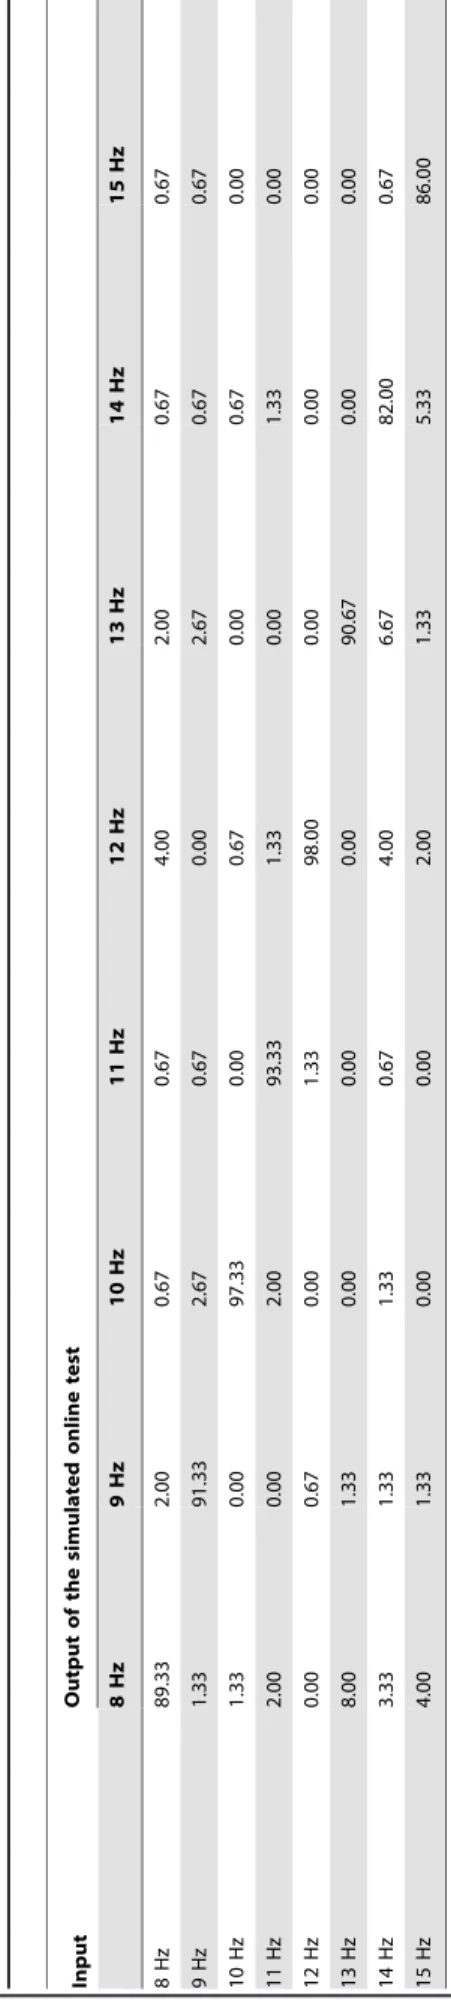 Table 3 summarizes BCI performance for all subjects in the simulated online experiment